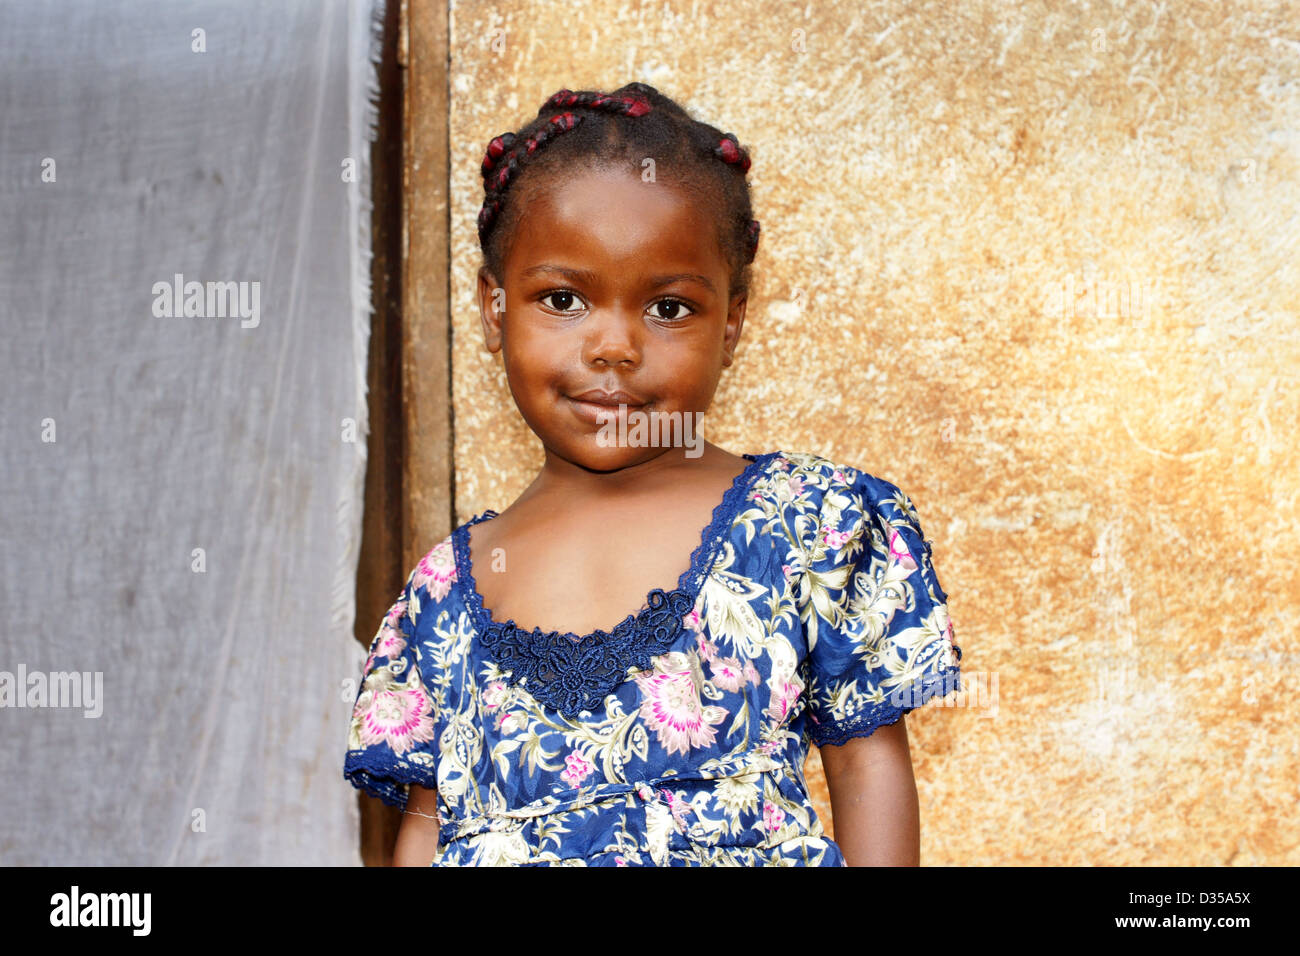 Portrait of a cute and sweet little black African girl, smiling but looking a bit shy, posing in front of her house. Stock Photo